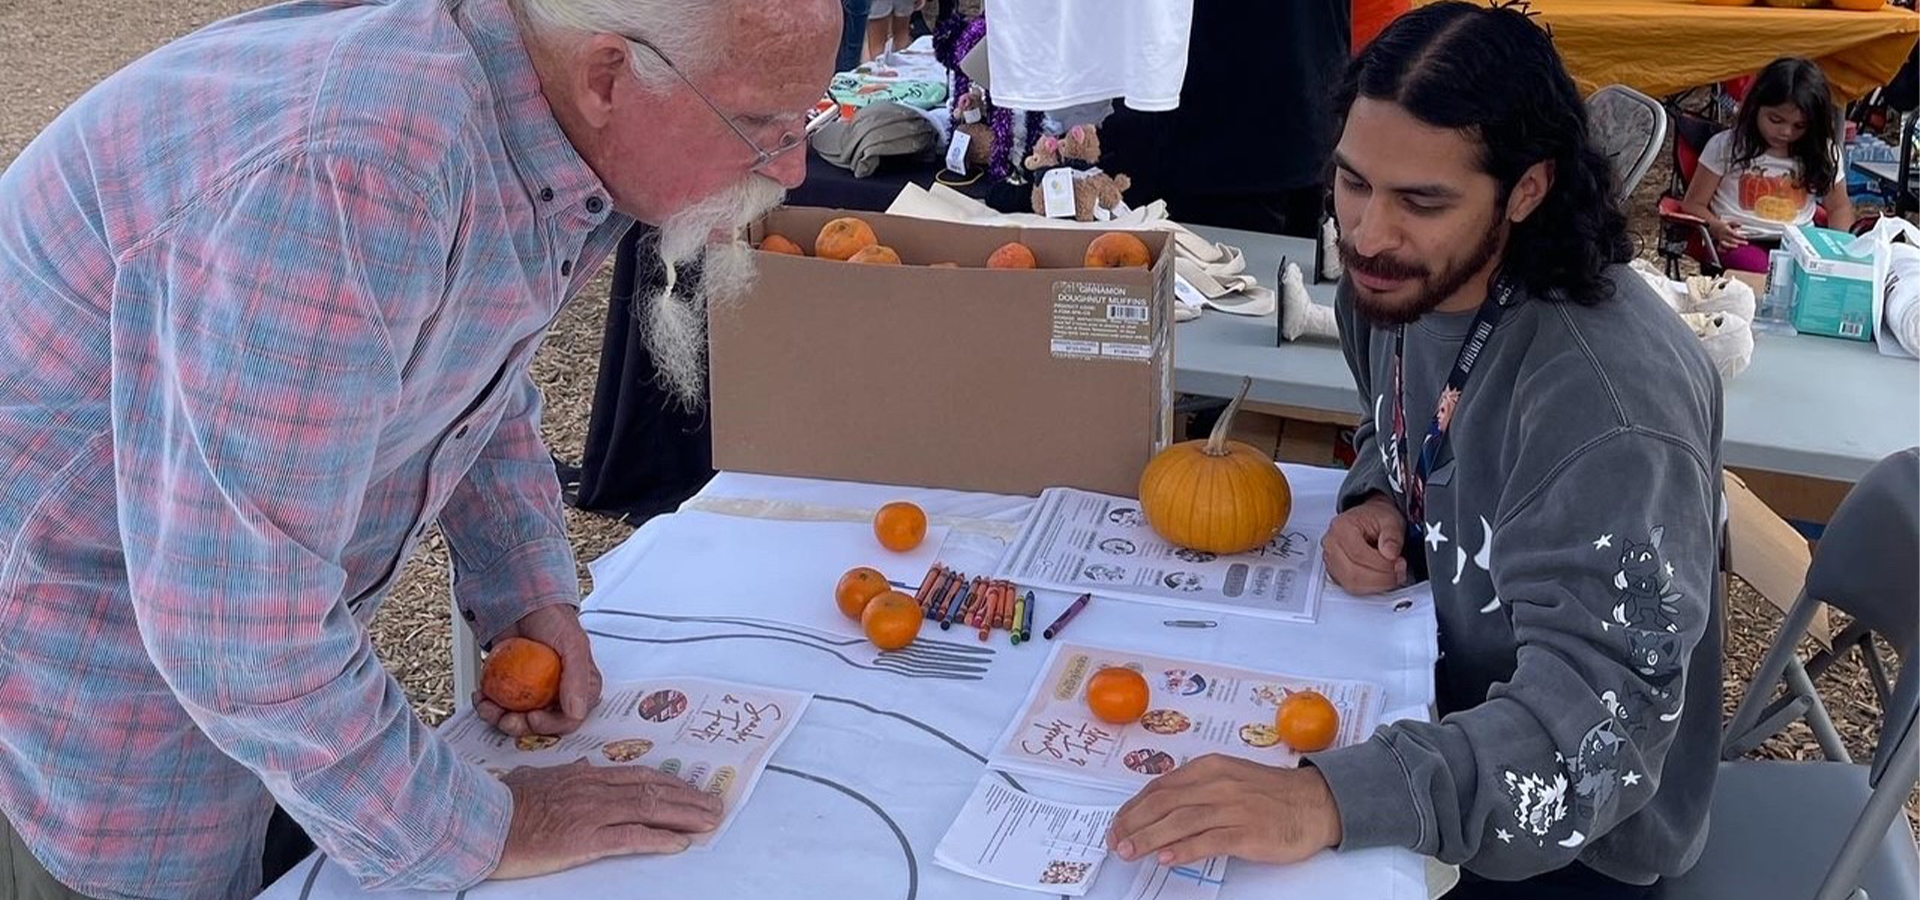 A nutrition student speaks with an elderly man at the booth